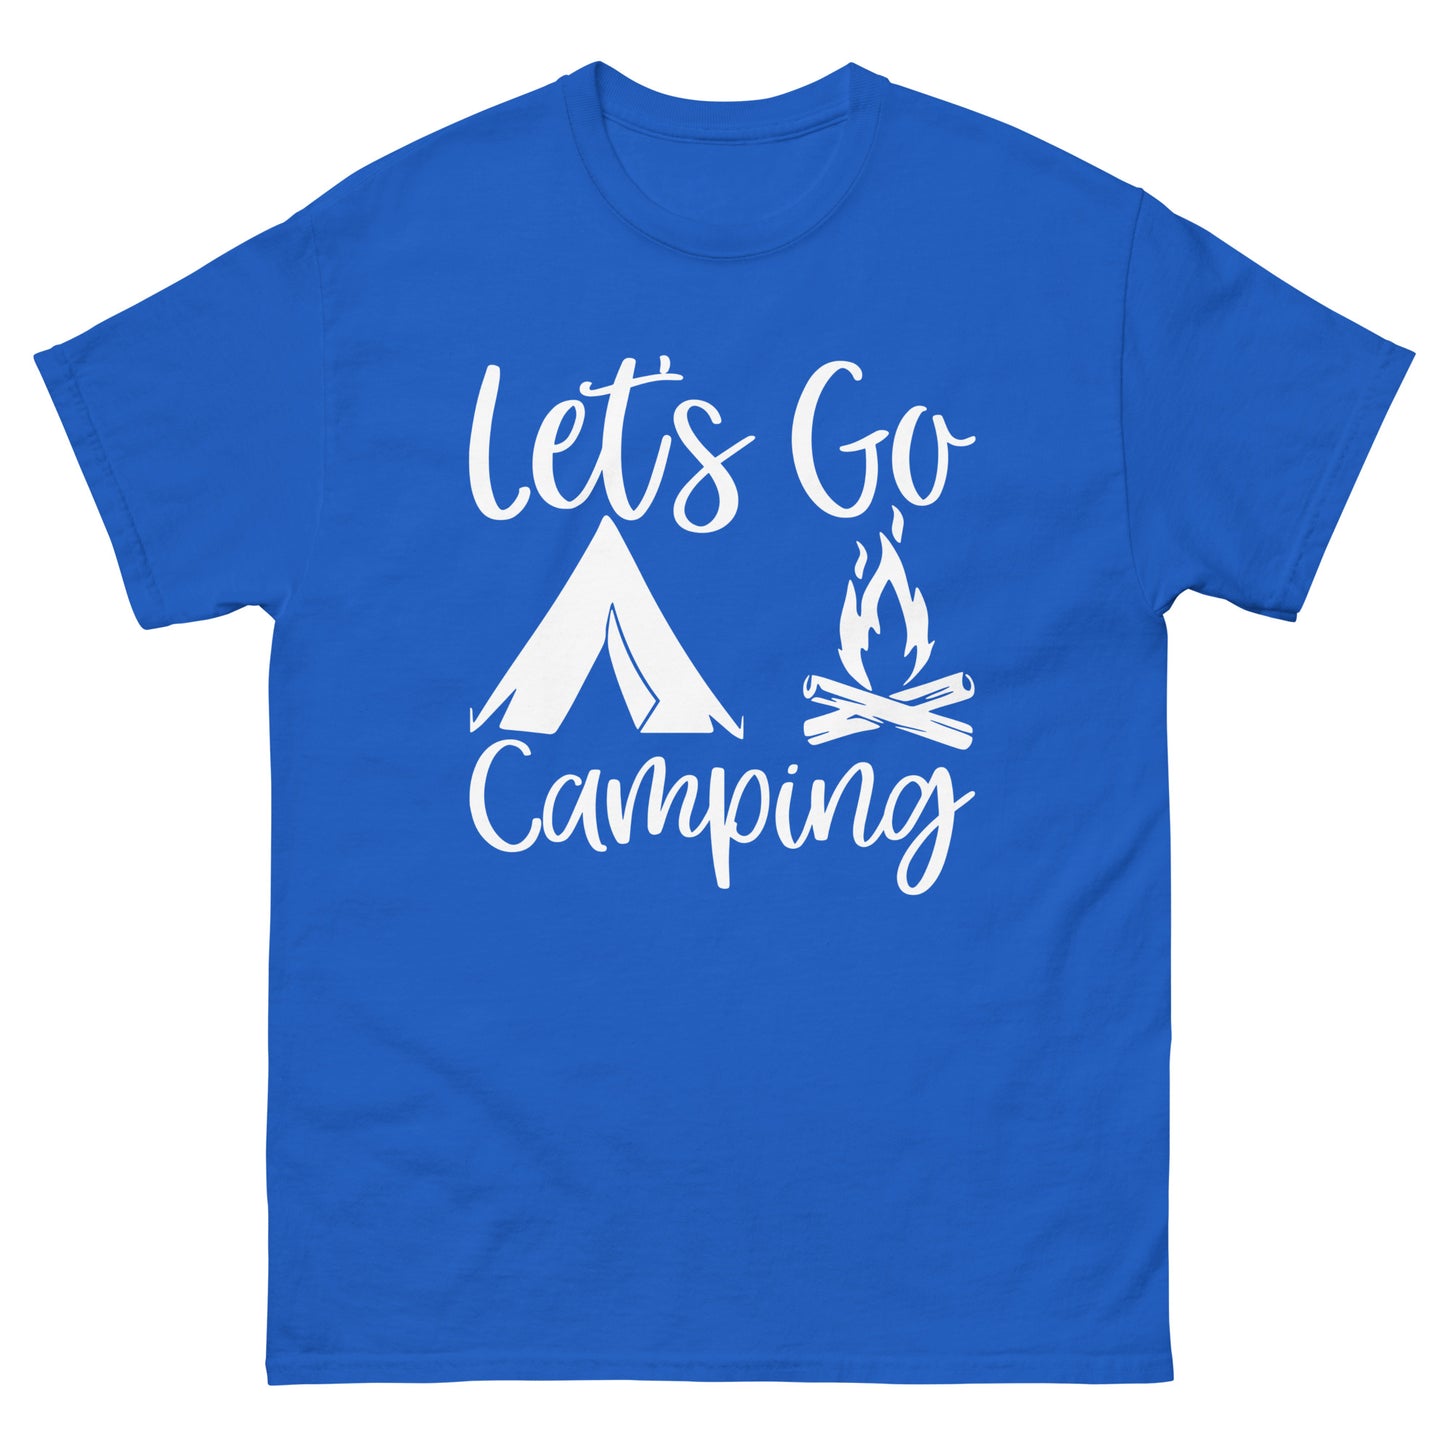 Lets go camping classic tee